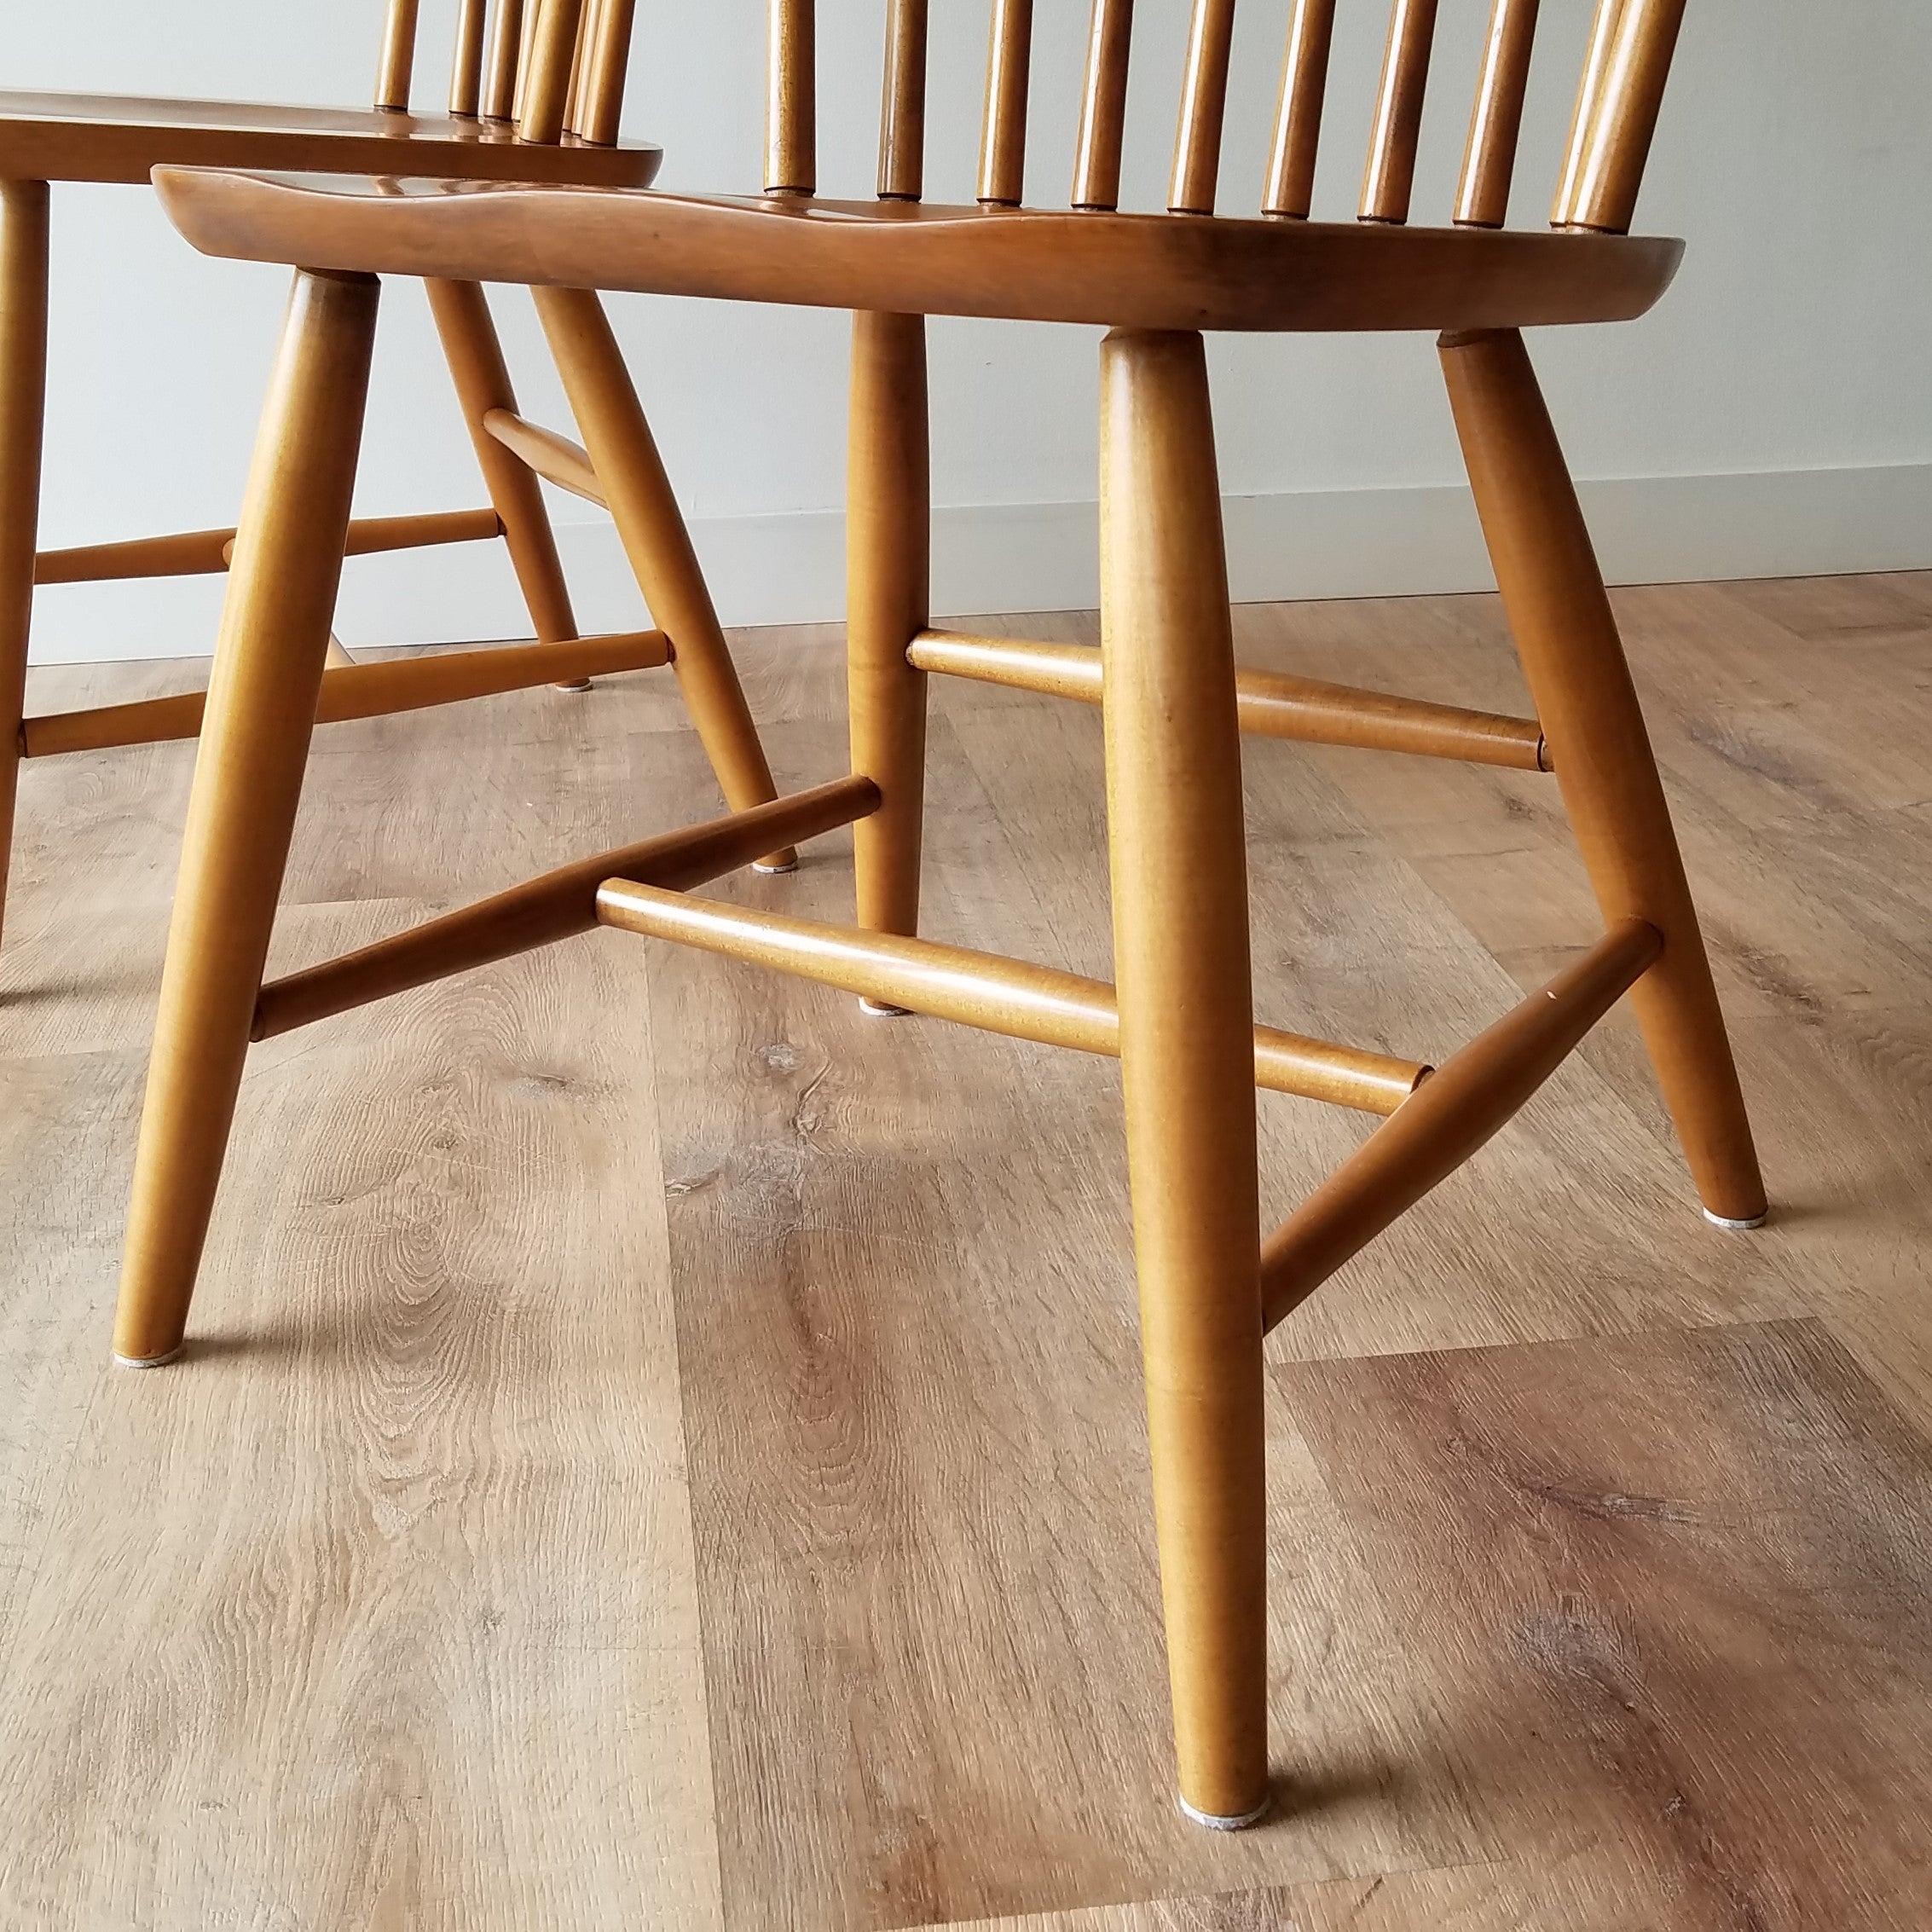 Ethan Allen Maple Dining Chairs